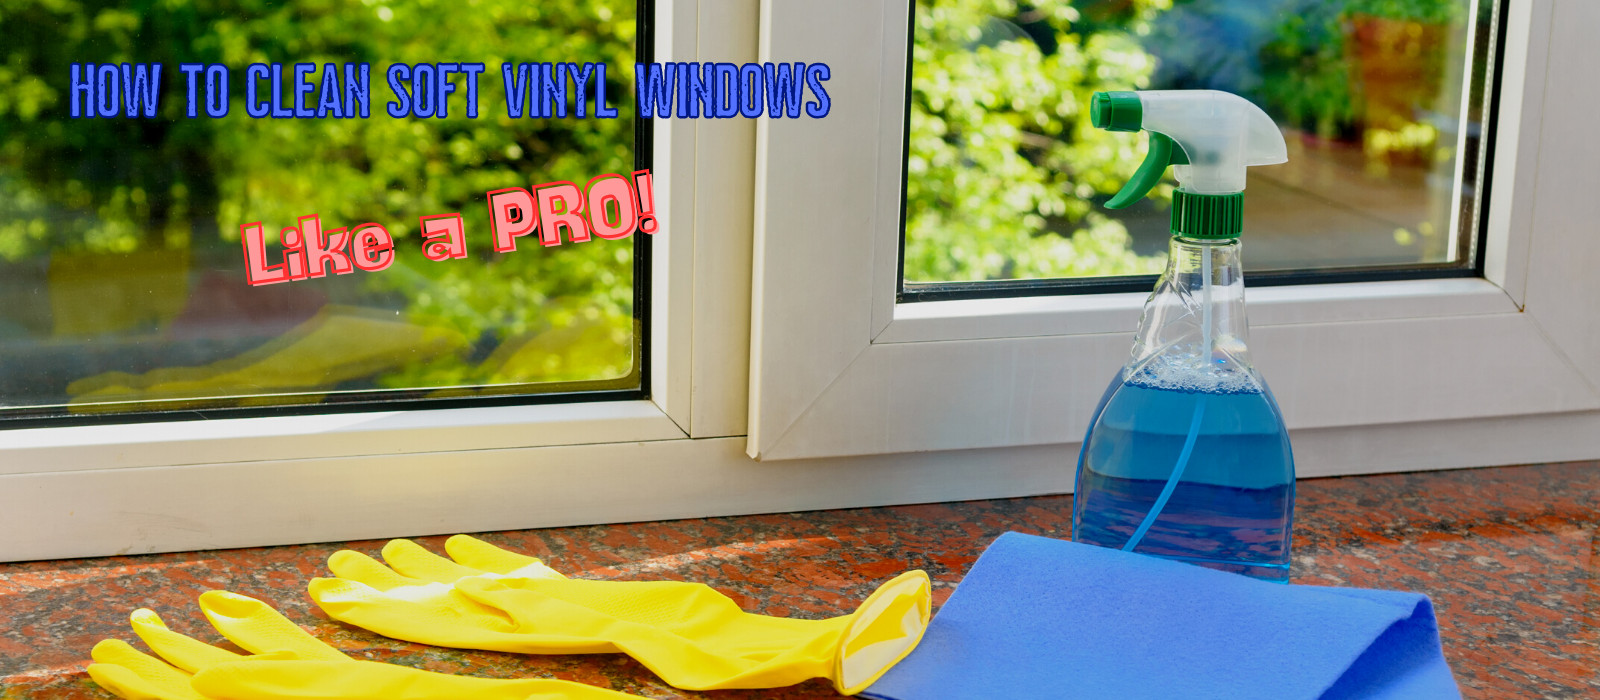 how to clean soft vinyl windows featured image